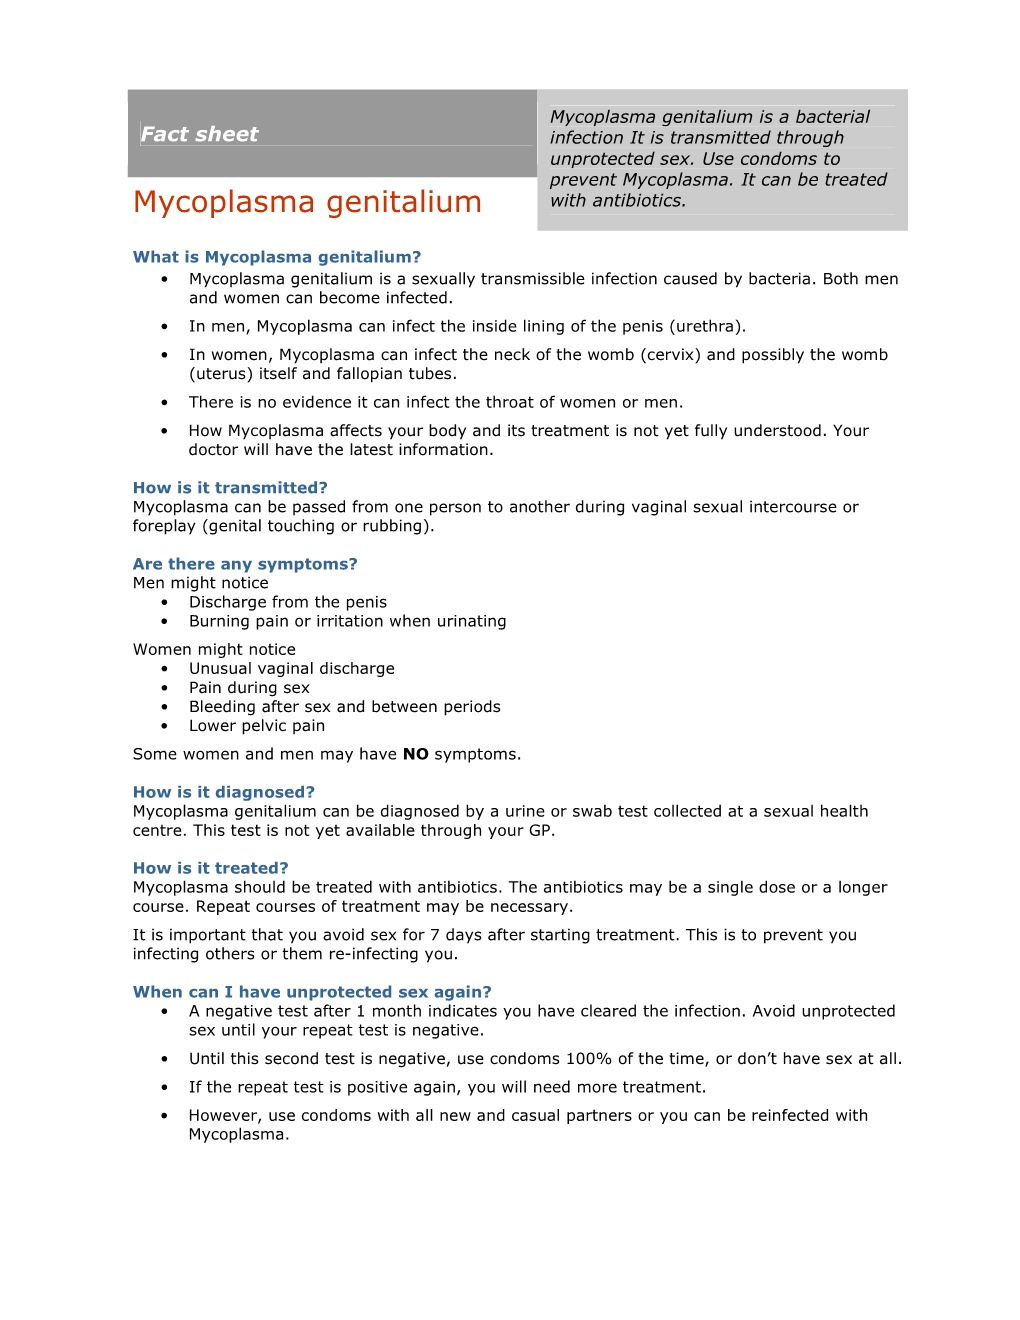 Mycoplasma Genitalium Is a Bacterial Fact Sheet Infection It Is Transmitted Through Unprotected Sex